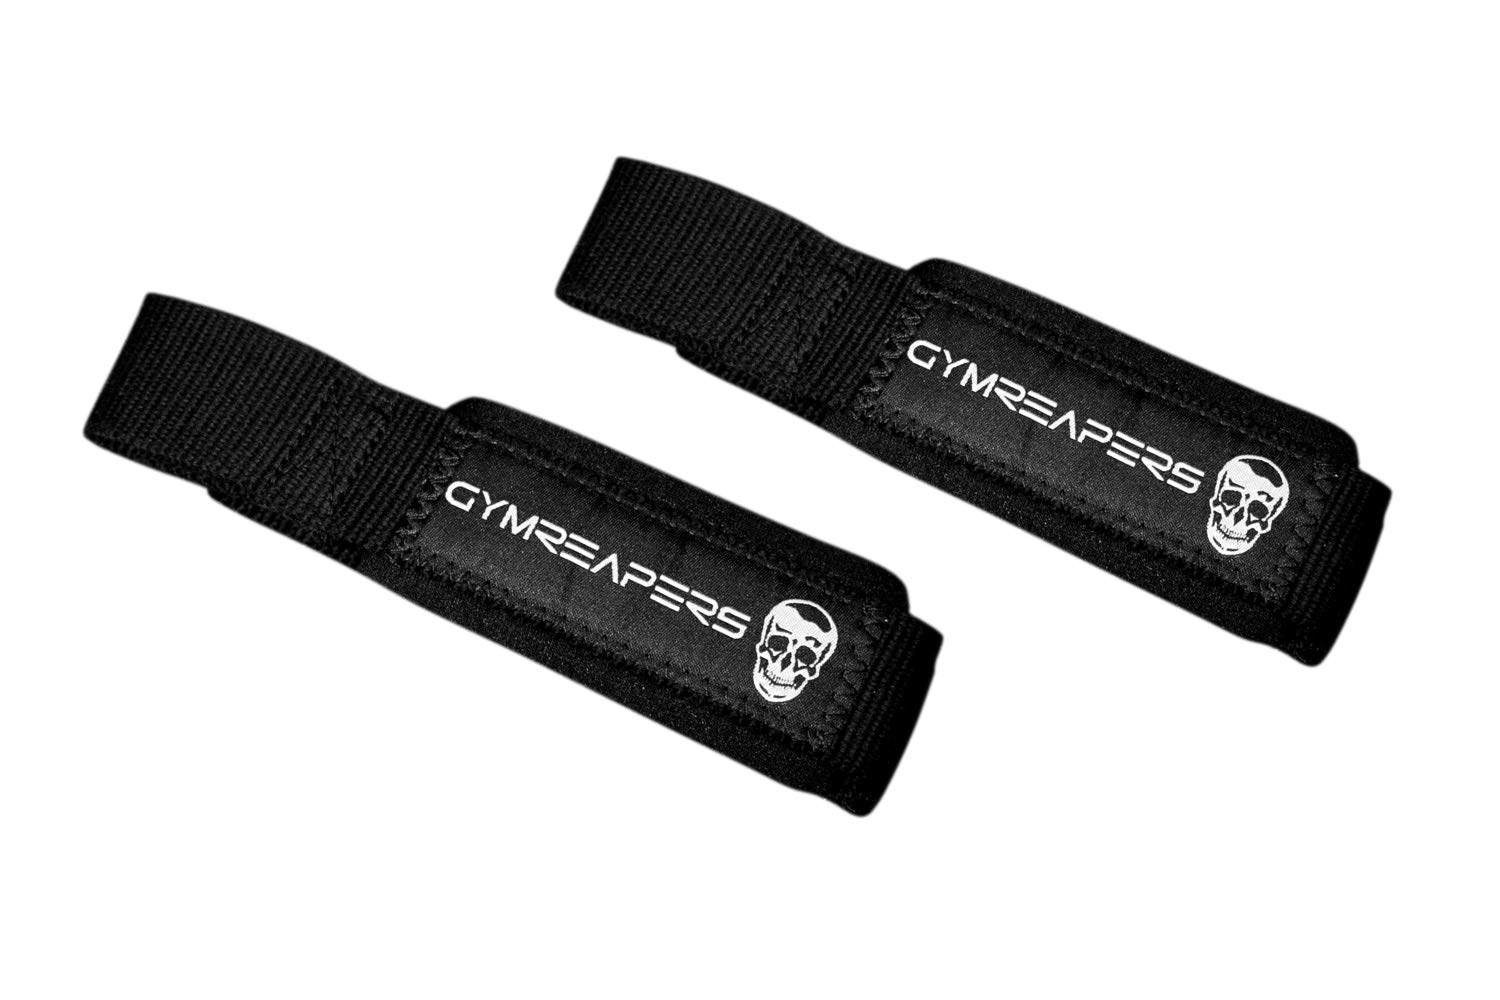 Gymreapers Lifting Wrist Straps for Weightlifting, Bodybuilding